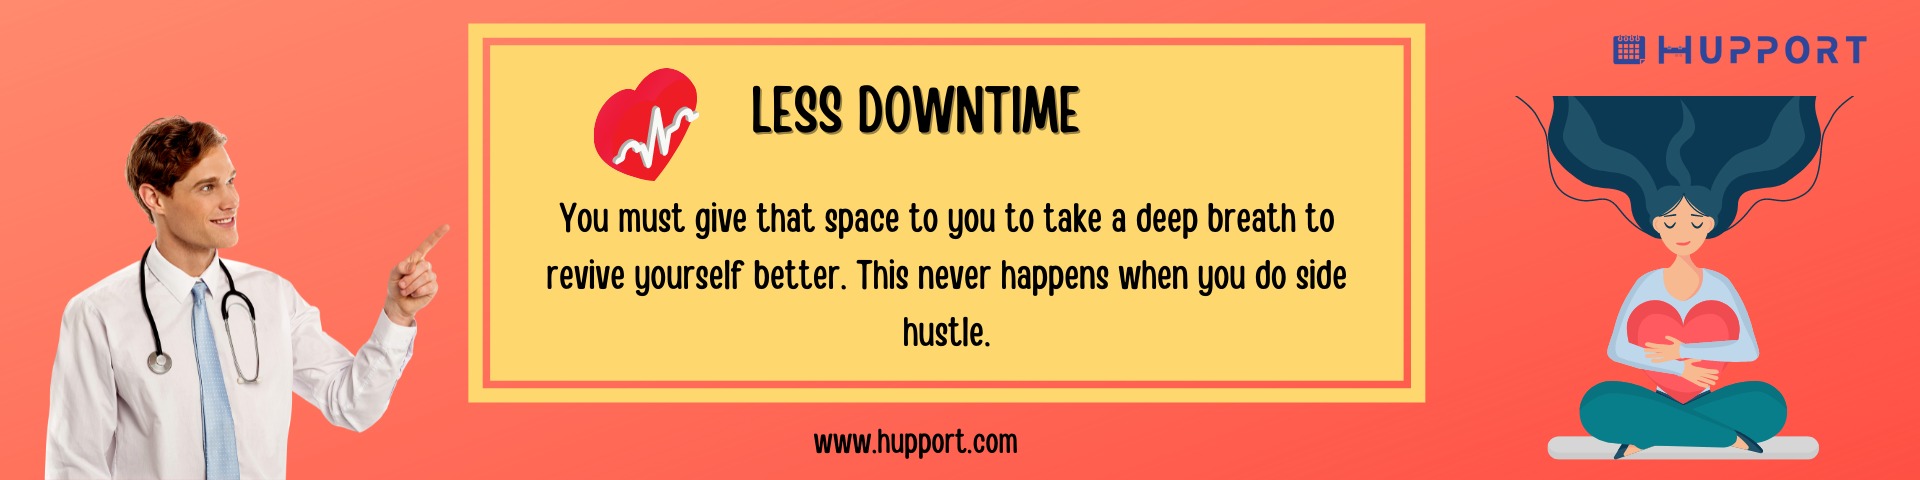 Less downtime